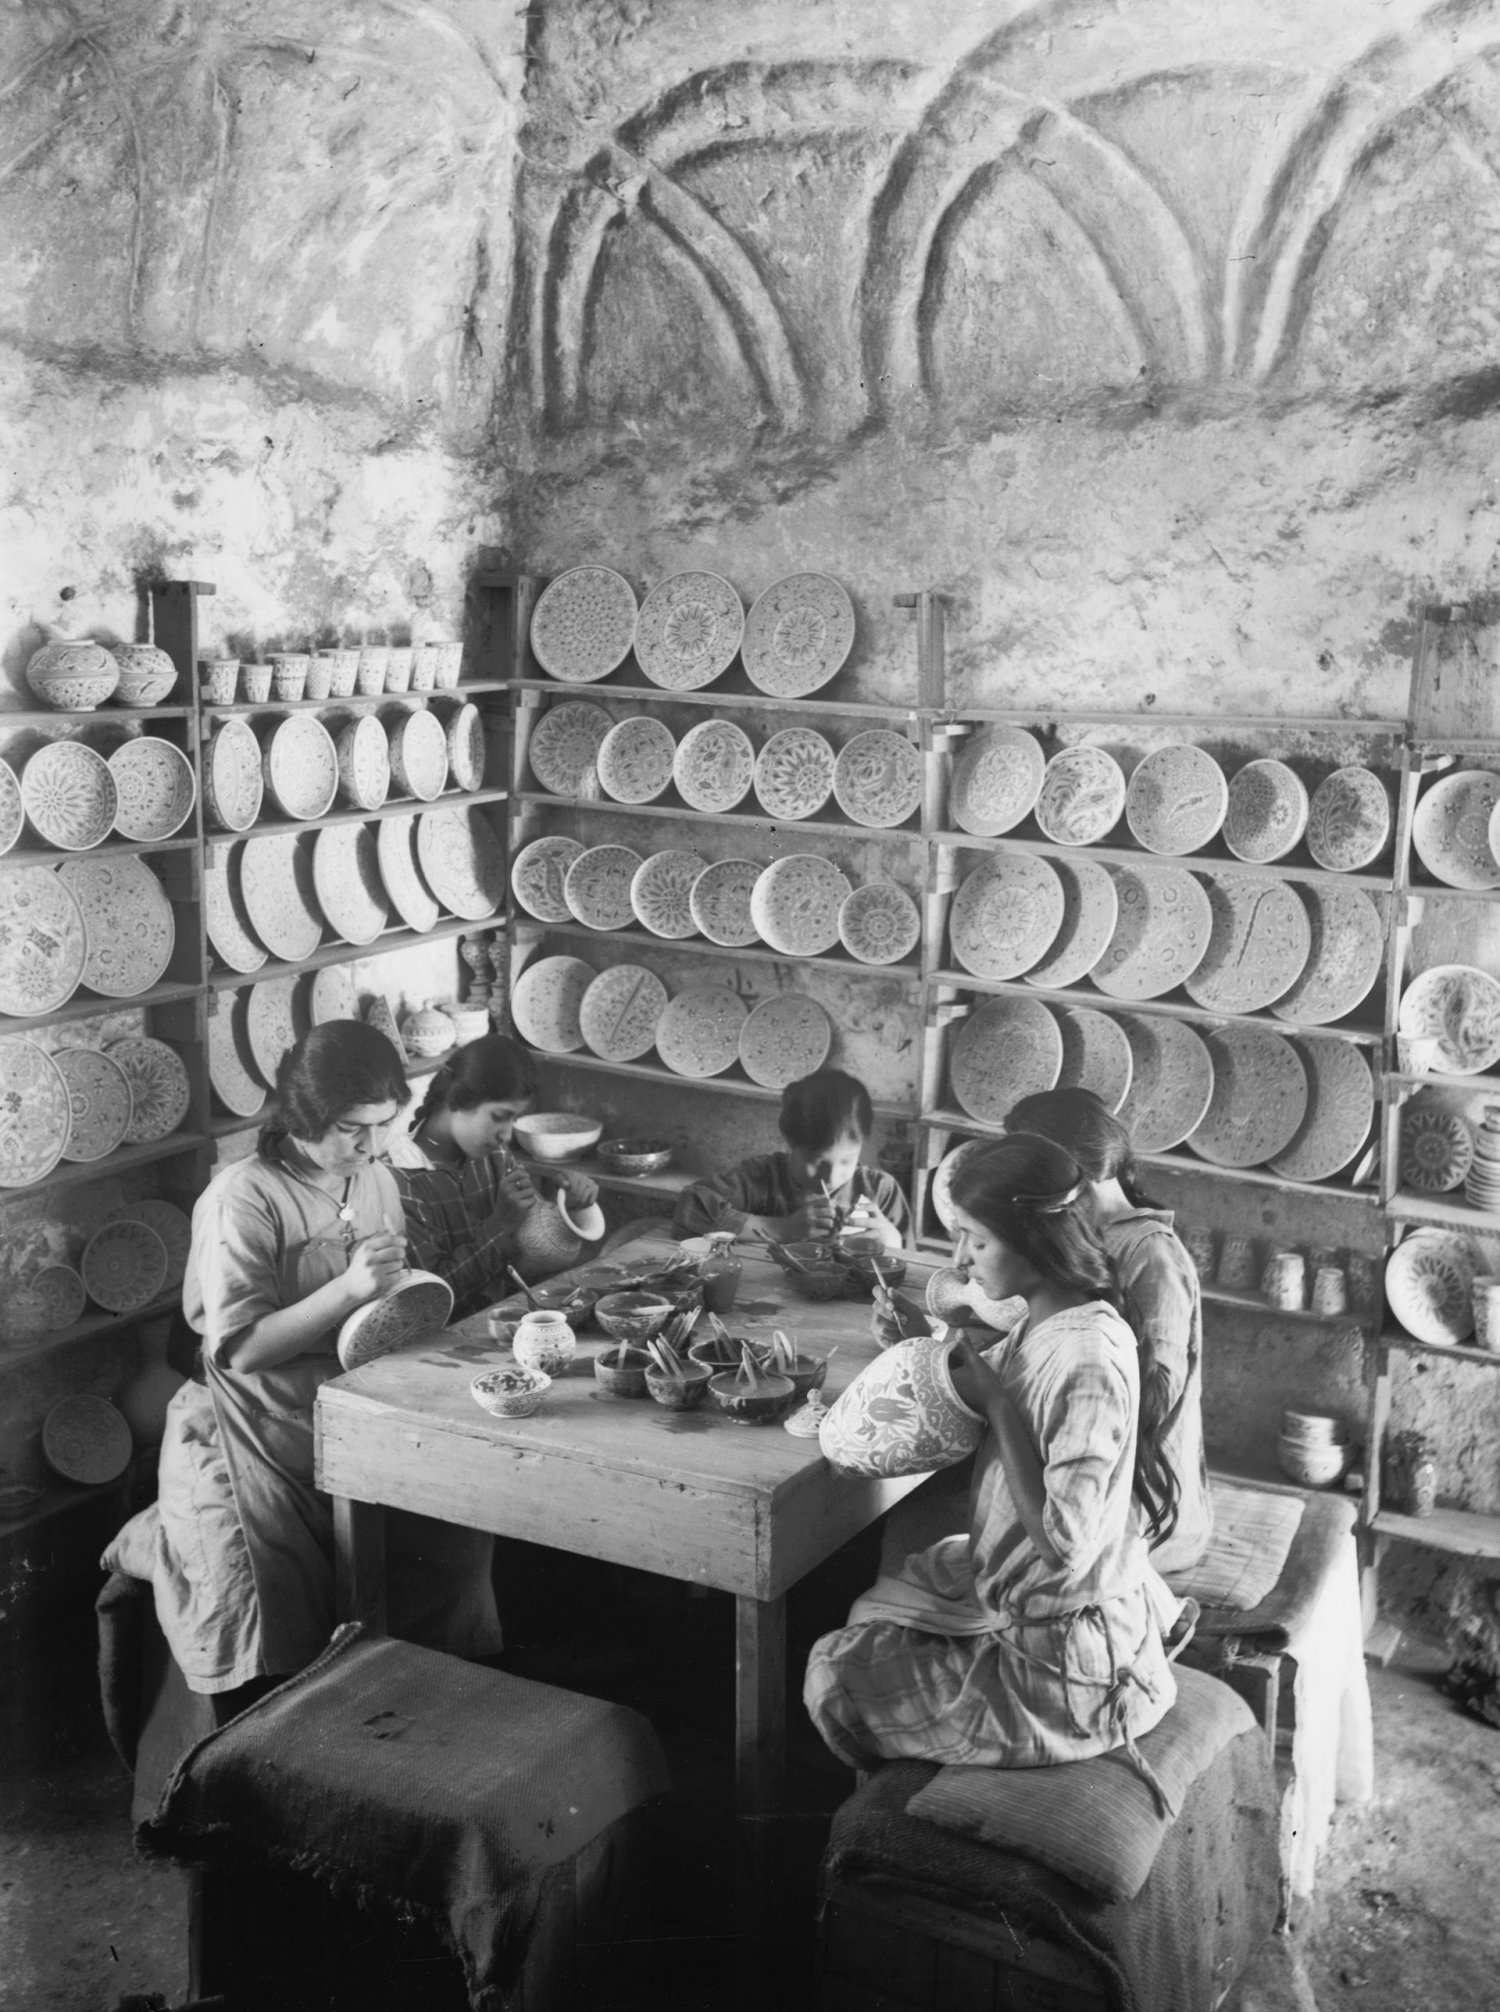 Girls painting pottery vases at the Dome of the Rock Tiles workshop, Via Dolorosa, Jerusalem, 1920s